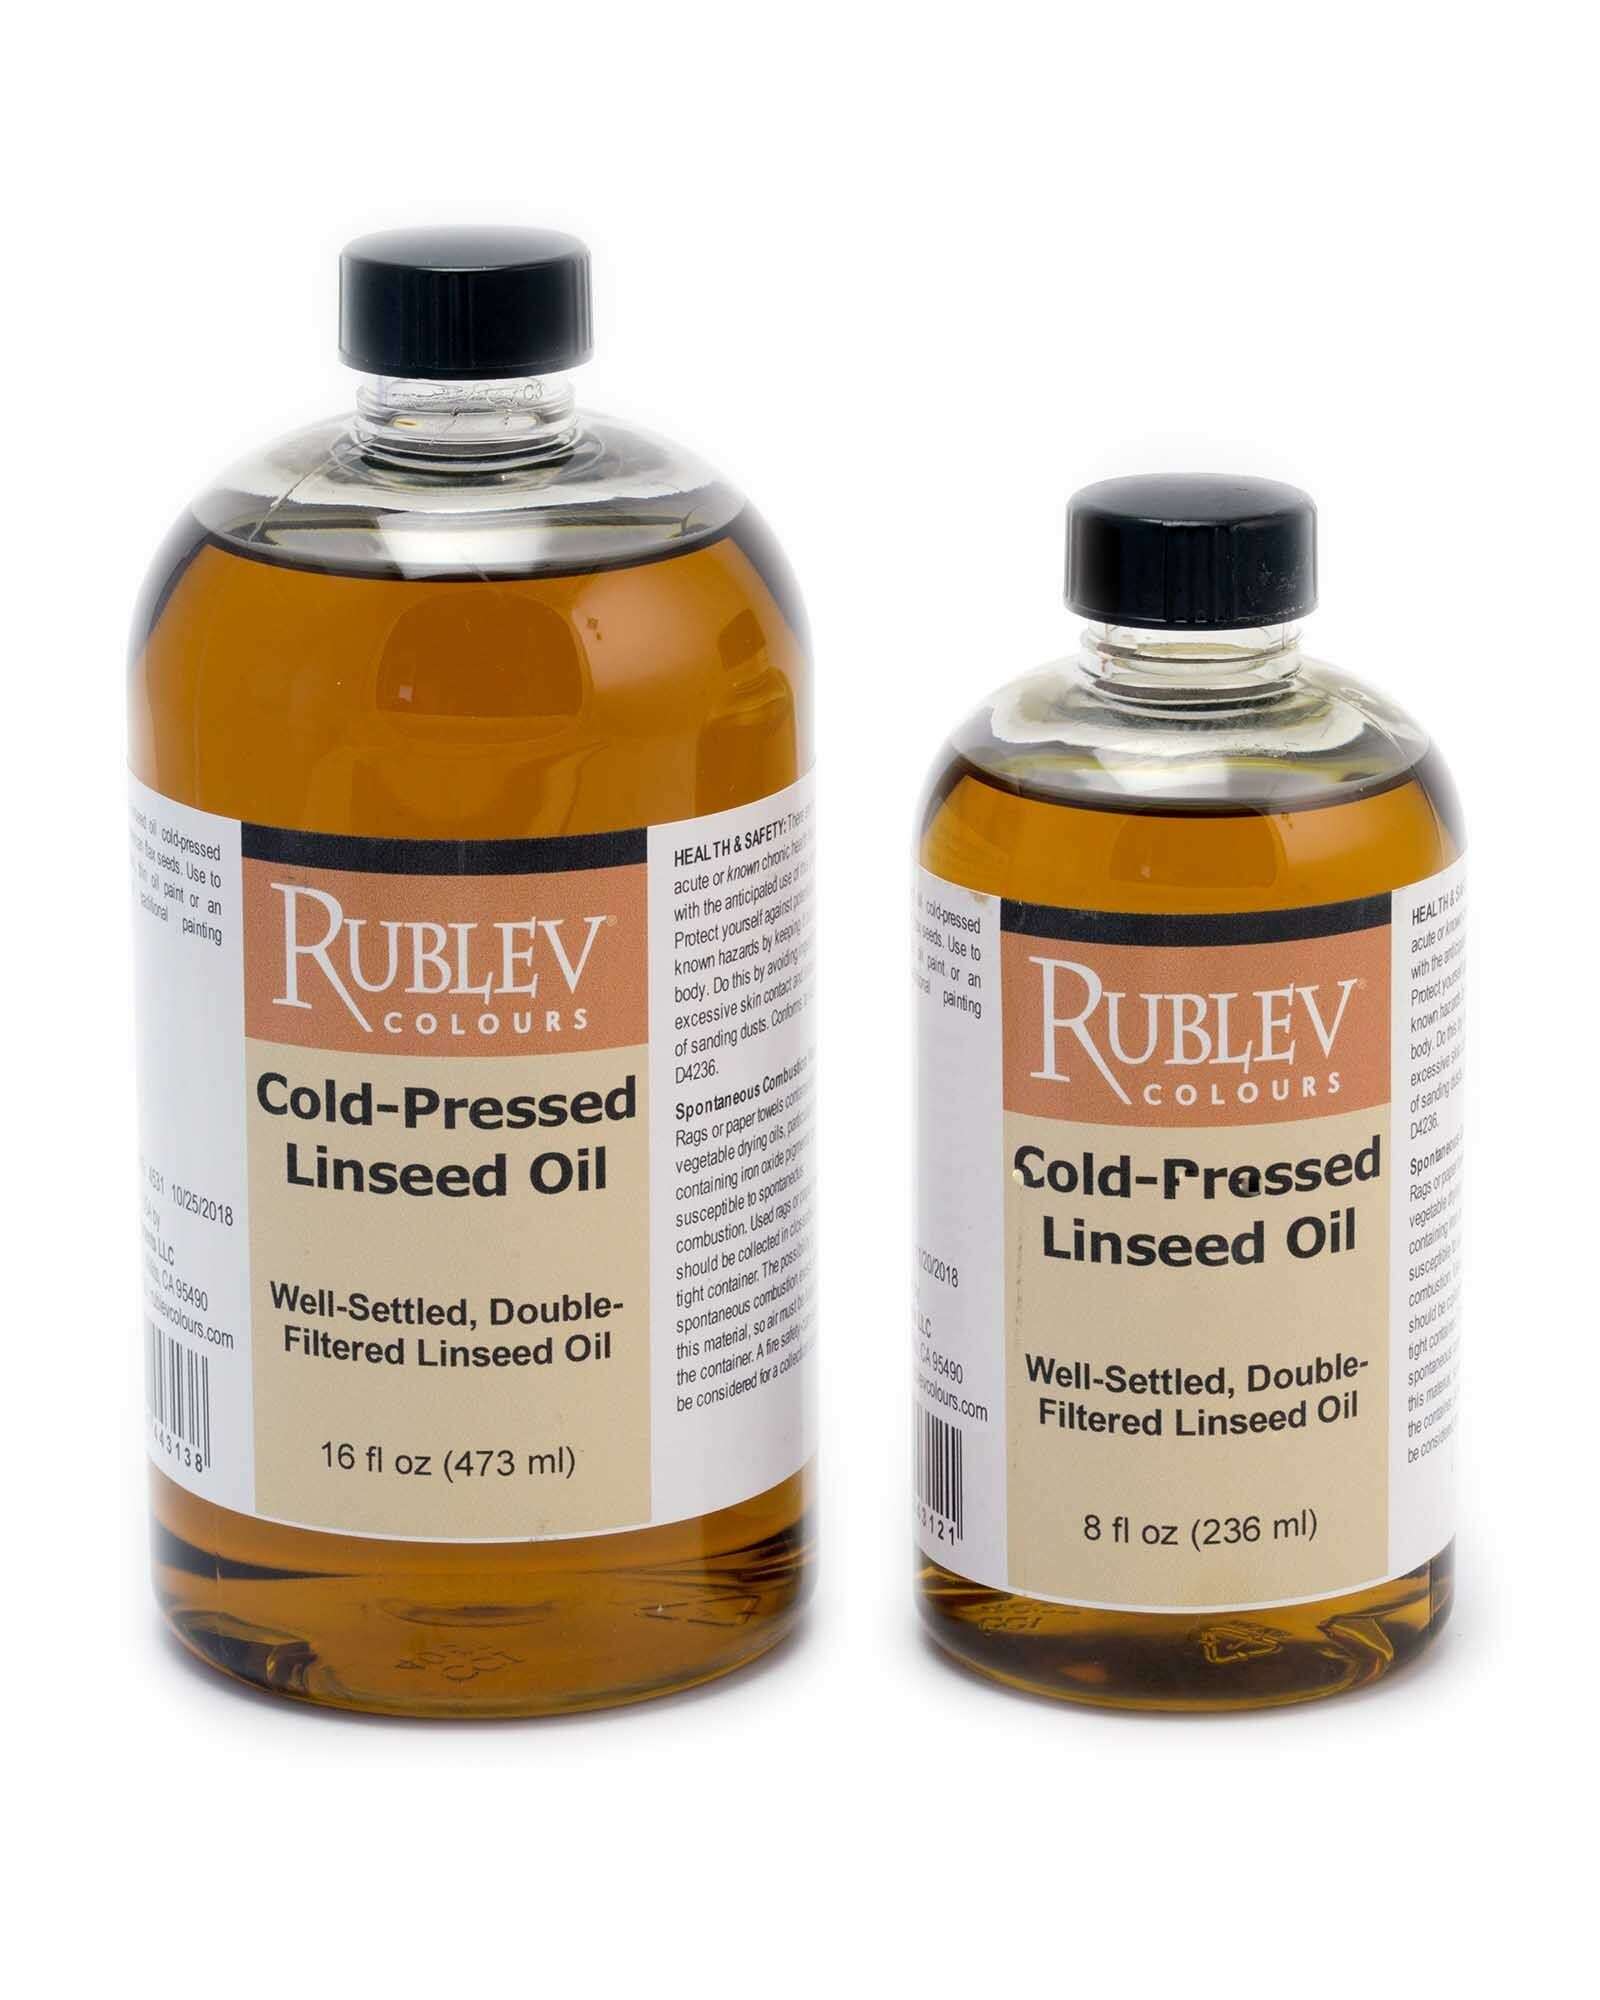 Cold-Pressed Linseed Oil – Linseed, Cold-pressed oil, Milled